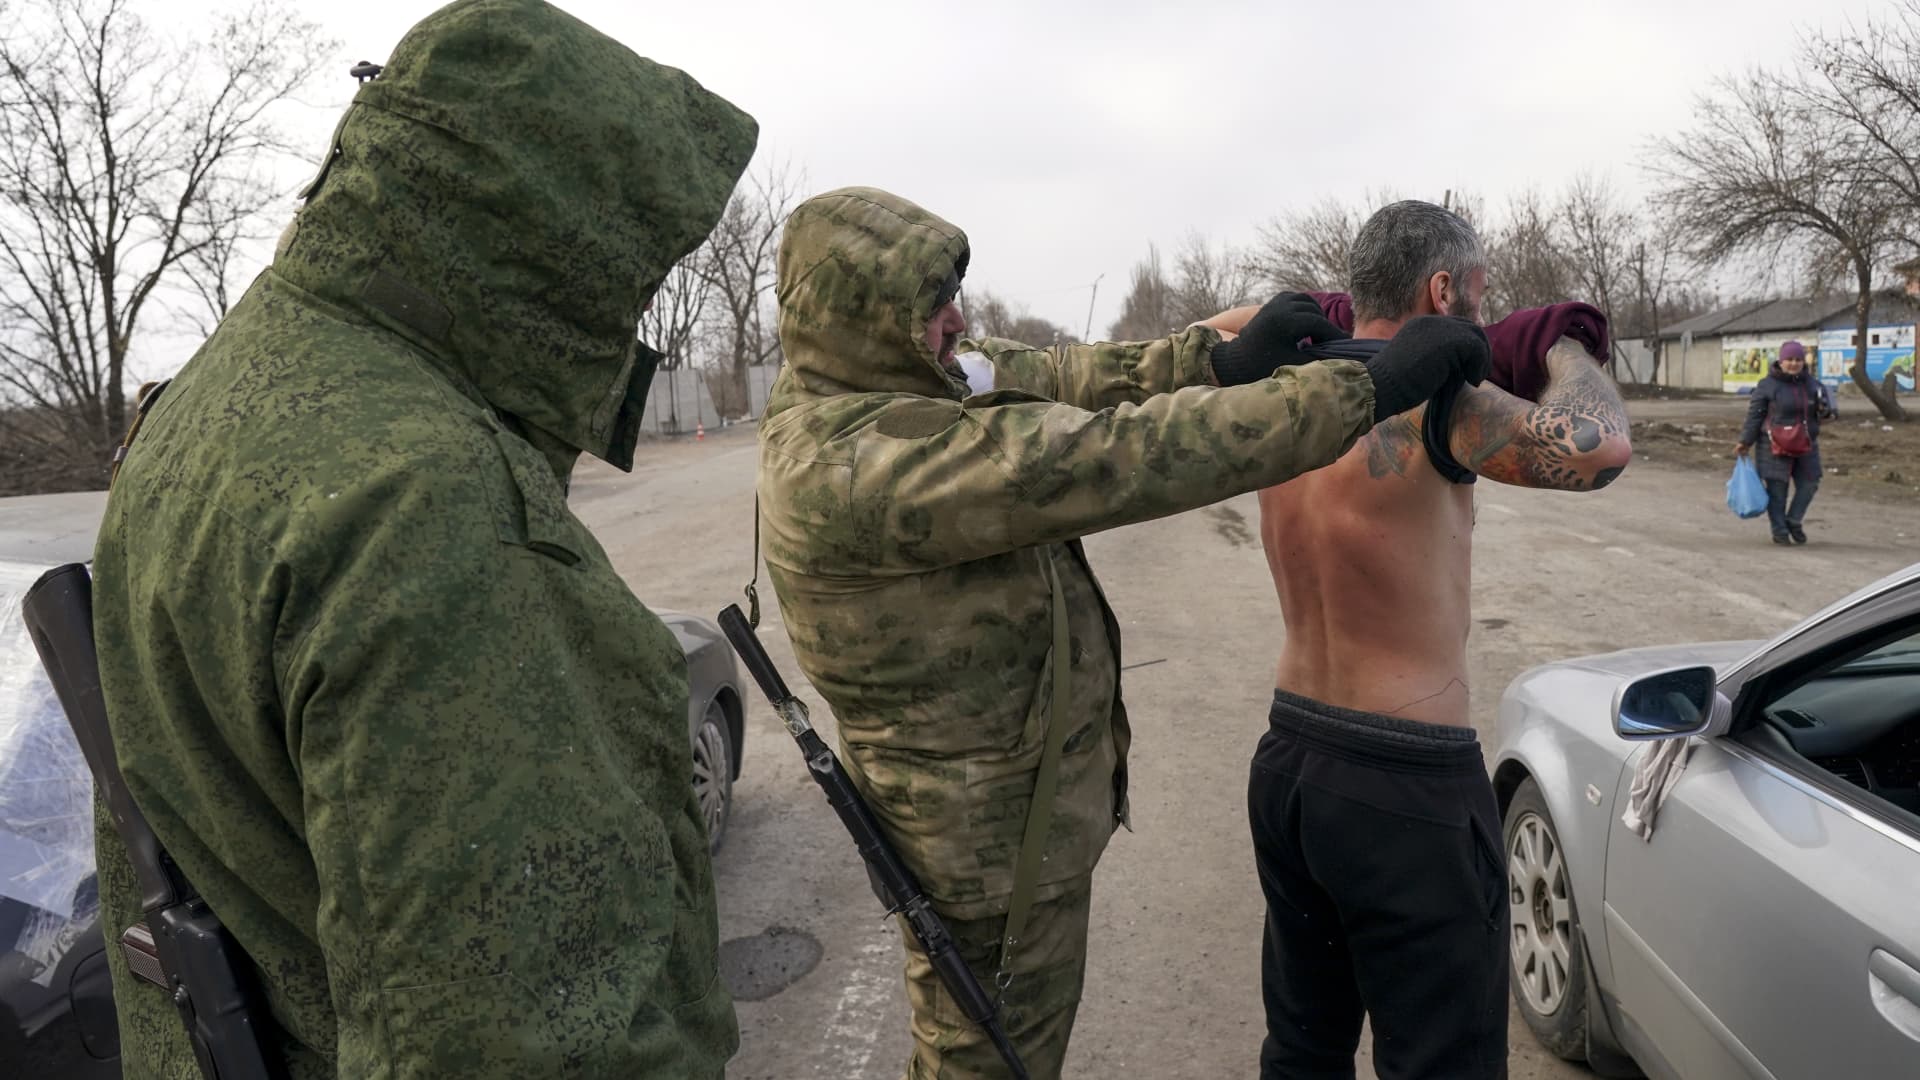 A civilian is being controlled at a check point by pro-Russian separatists as civilians trapped in Mariupol city under Russian attacks, are evacuated in groups under the control of pro-Russian separatists, through other cities, in Mariupol, Ukraine on March 20, 2022.